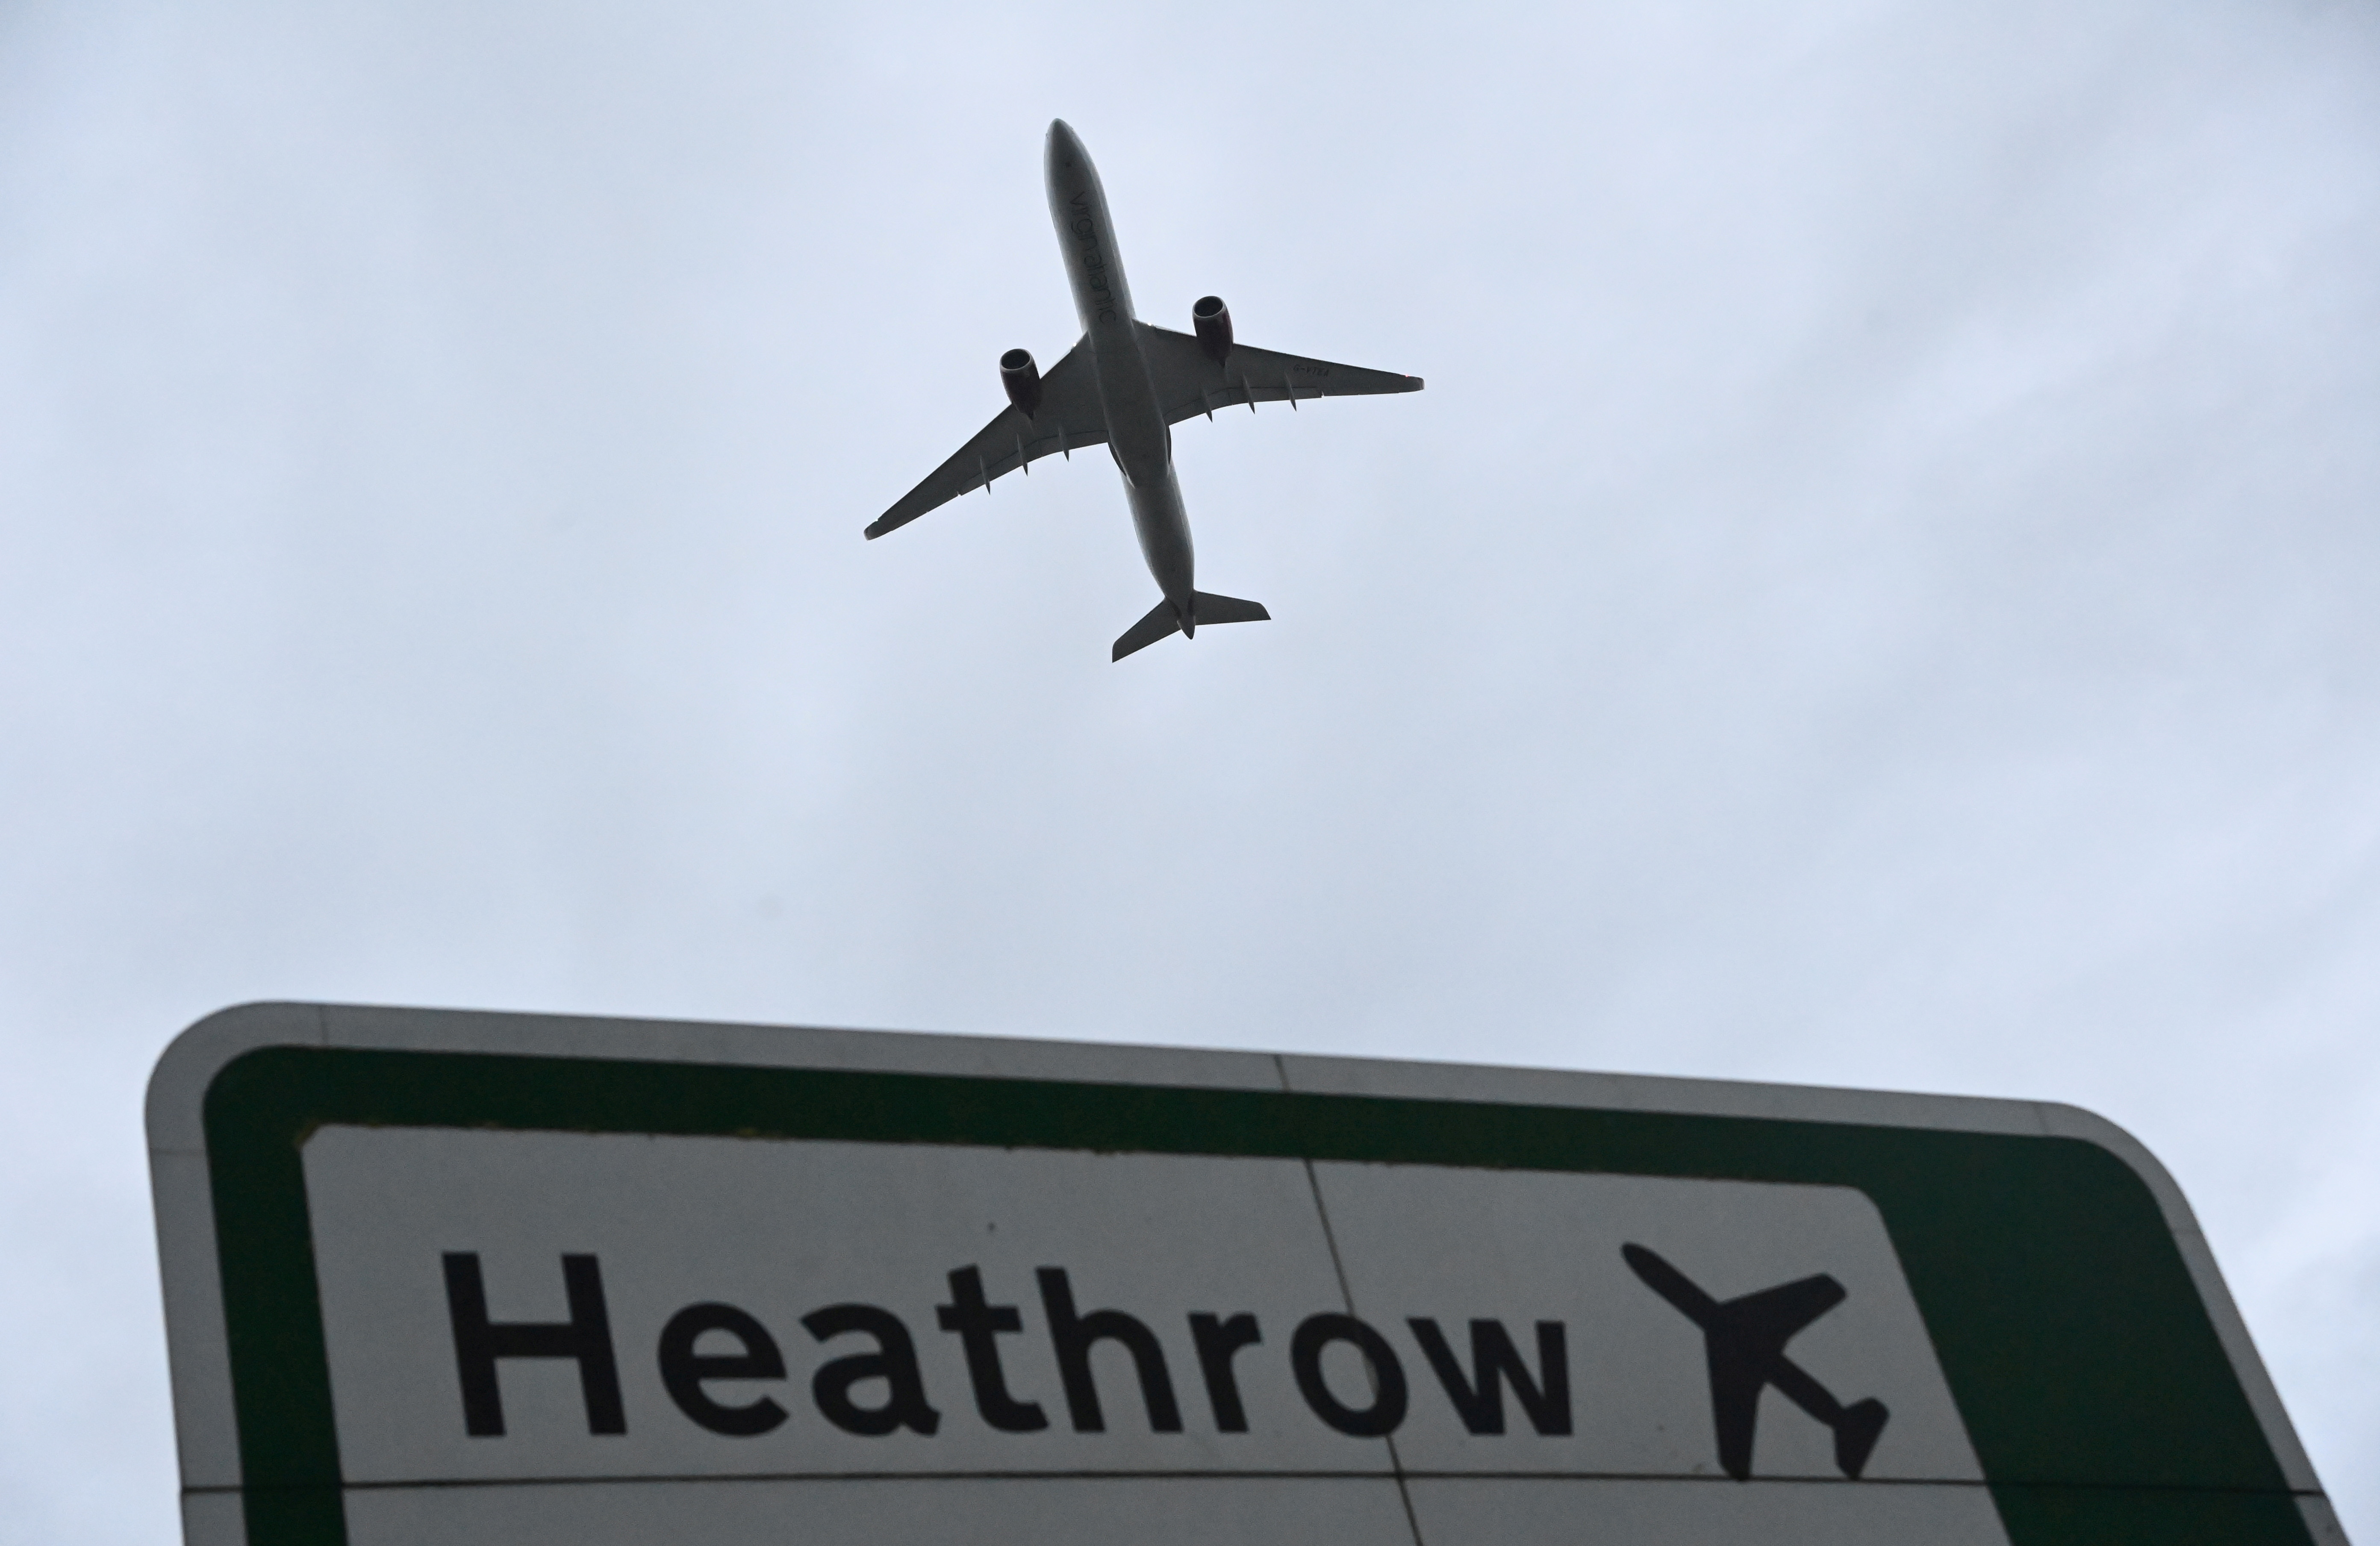 An aircraft takes off at Heathrow Airport amid the spread of the coronavirus disease (COVID-19) pandemic in London, Britain, February 4, 2021. REUTERS/Toby Melville/File Photo